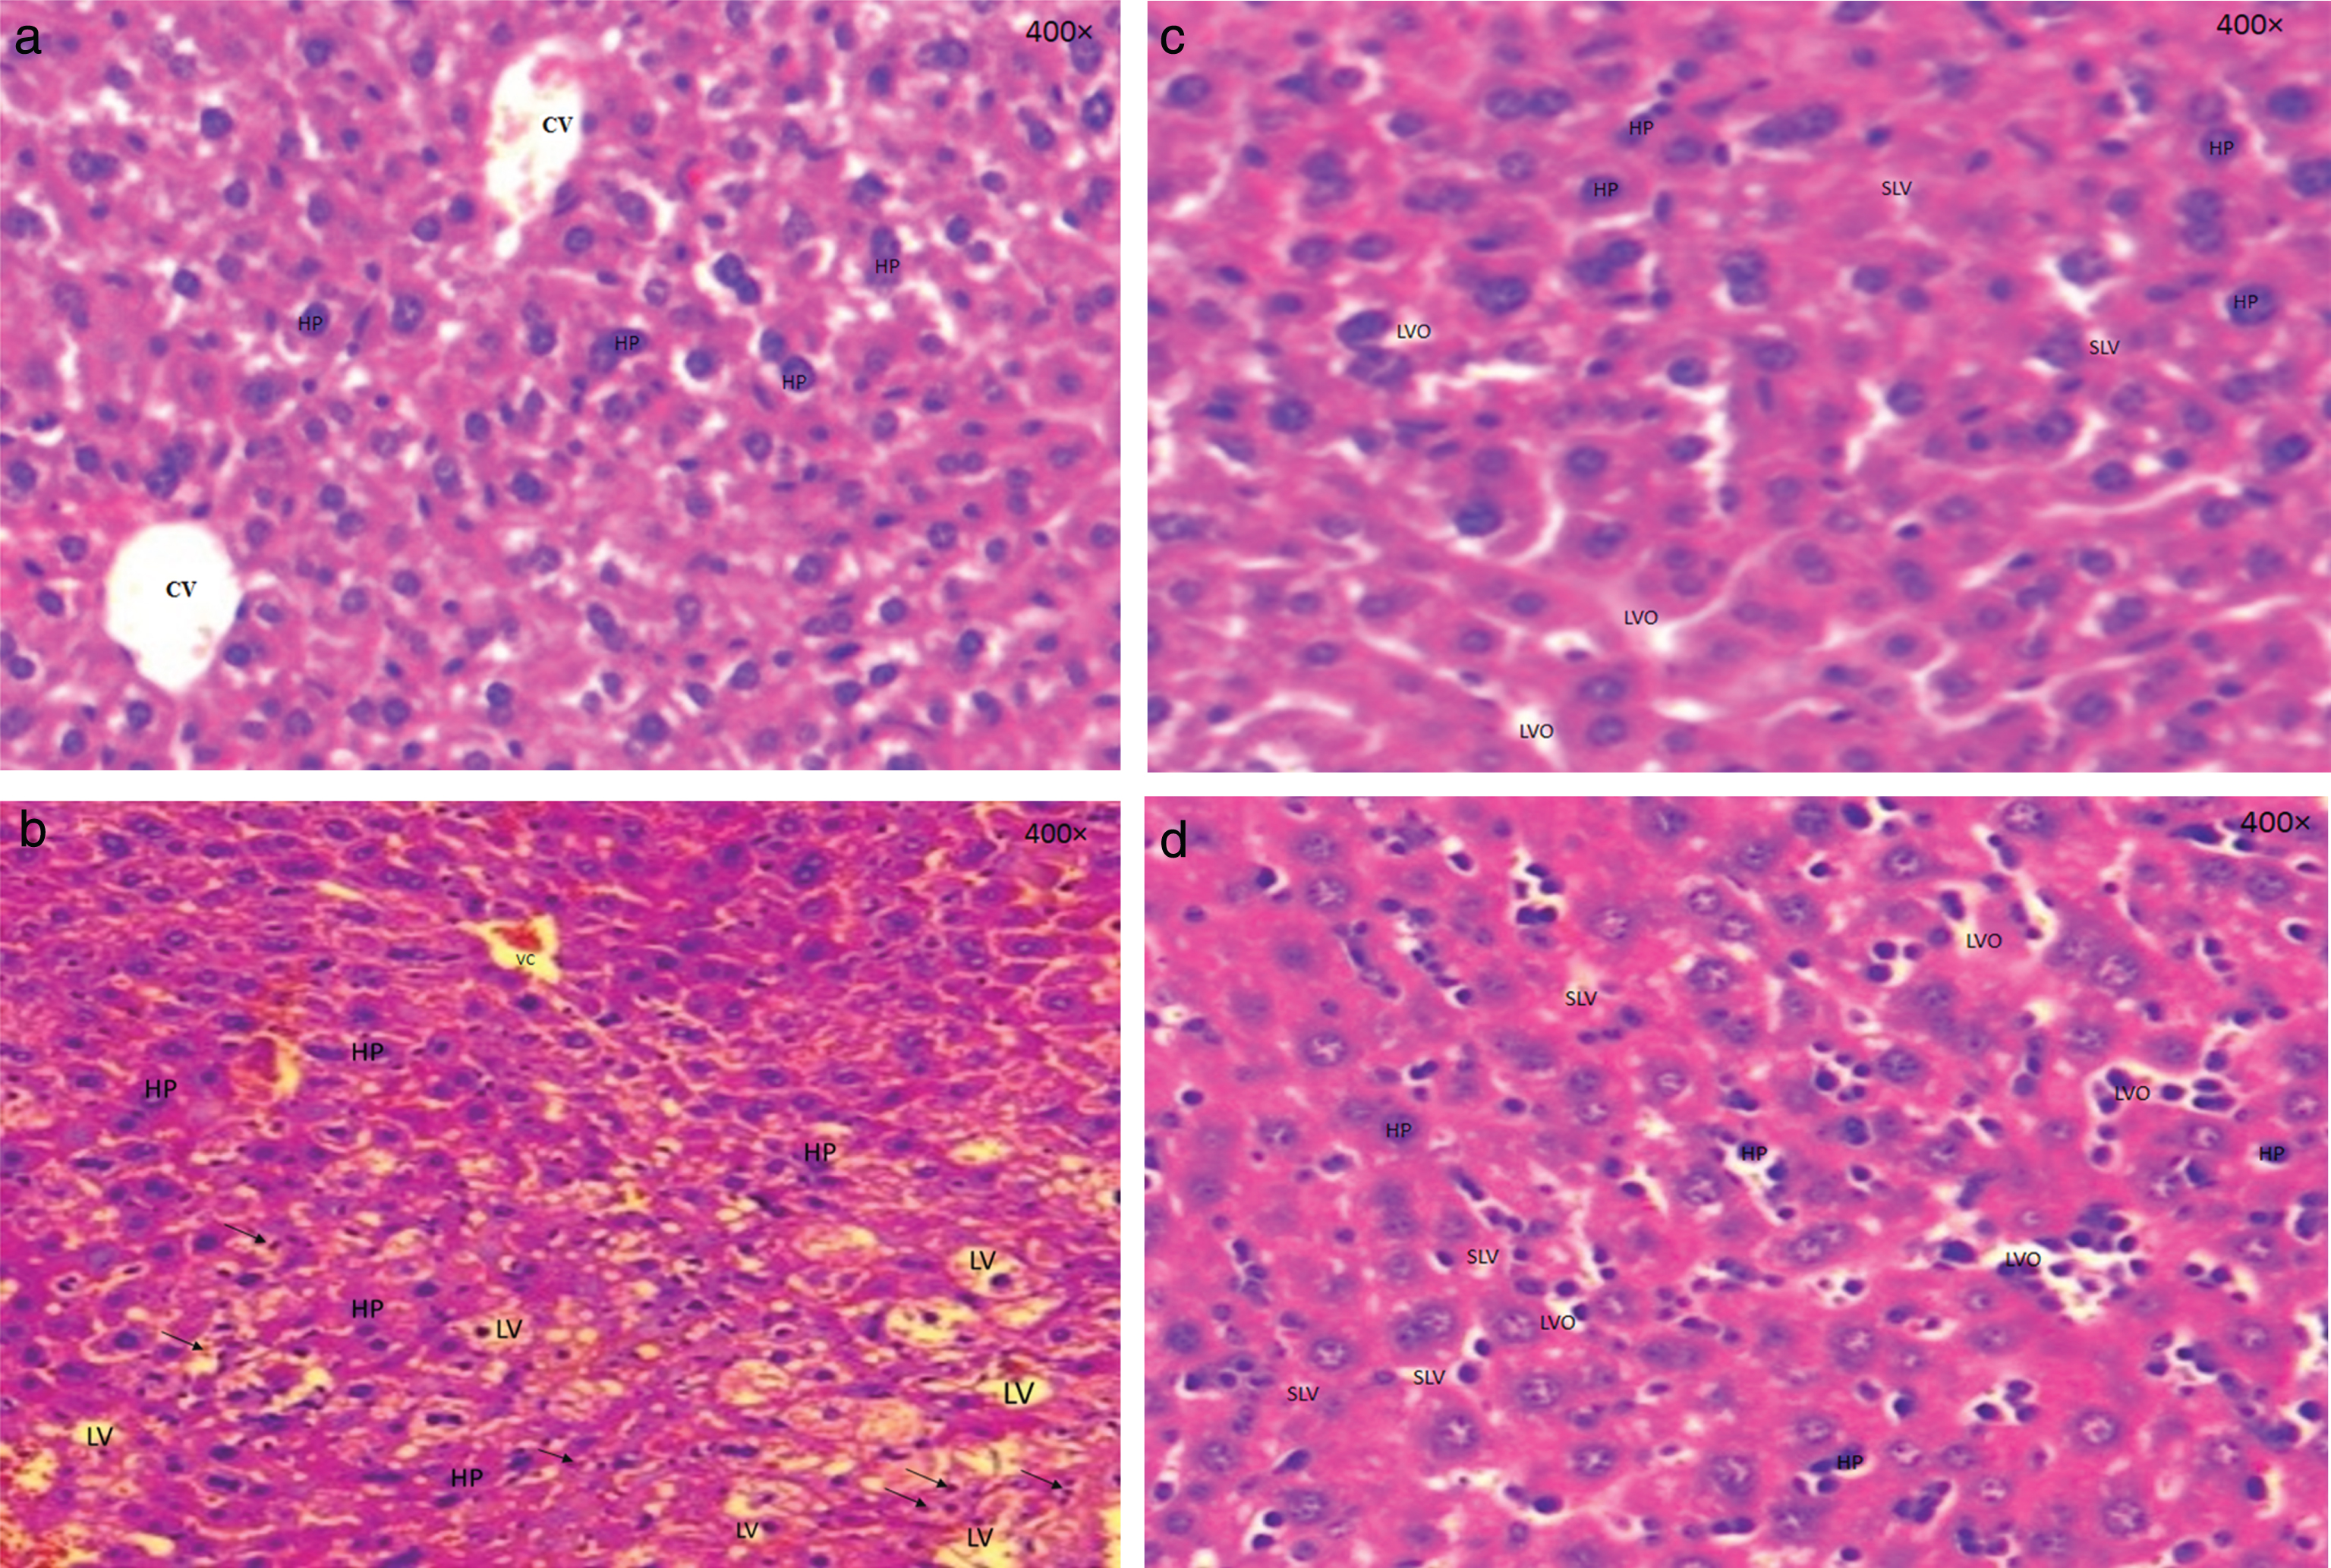 (a) Sectional representations (400×magnification) of untreated liver with hematoxylin/eosin performed after 24 hours of processing. Lot I (normal control). (CV): congestive vein. (b) Sectional representations (400×magnification) of pre-treated, triton-induced hyperlipidaemic mice liver with hematoxylin/eosin performed after 24 hours of processing. Lot II (control hyperlipidaemic) showing a massive distribution of lipids within hepatocytes (HP) which allows intrahepatic provision of these lipids in the form of vacuoles (LV). Presence of an infiltrate with neutrophils (arrows). (c) Sectional representations (400×magnification) of pre-treated, triton-induced hyperlipidaemic and a dose of 300 mg/kg from leaf extracts mice liver with hematoxylin/eosin performed after 24 hours of processing. Lot III showing a small lipid vacuoles (SLV) and others optically (LVO) empty which are present in hepatocytes. (d) Sectional representations (400×magnification) of pre-treated, triton-induced hyperlipidaemic and a dose of 300 mg/kg from twig extracts mice liver with hematoxylin/eosin performed after 24 hours of processing. Lot IV showing a small lipid vacuoles (SLV) and others optically (LVO) empty which are present in hepatocytes.